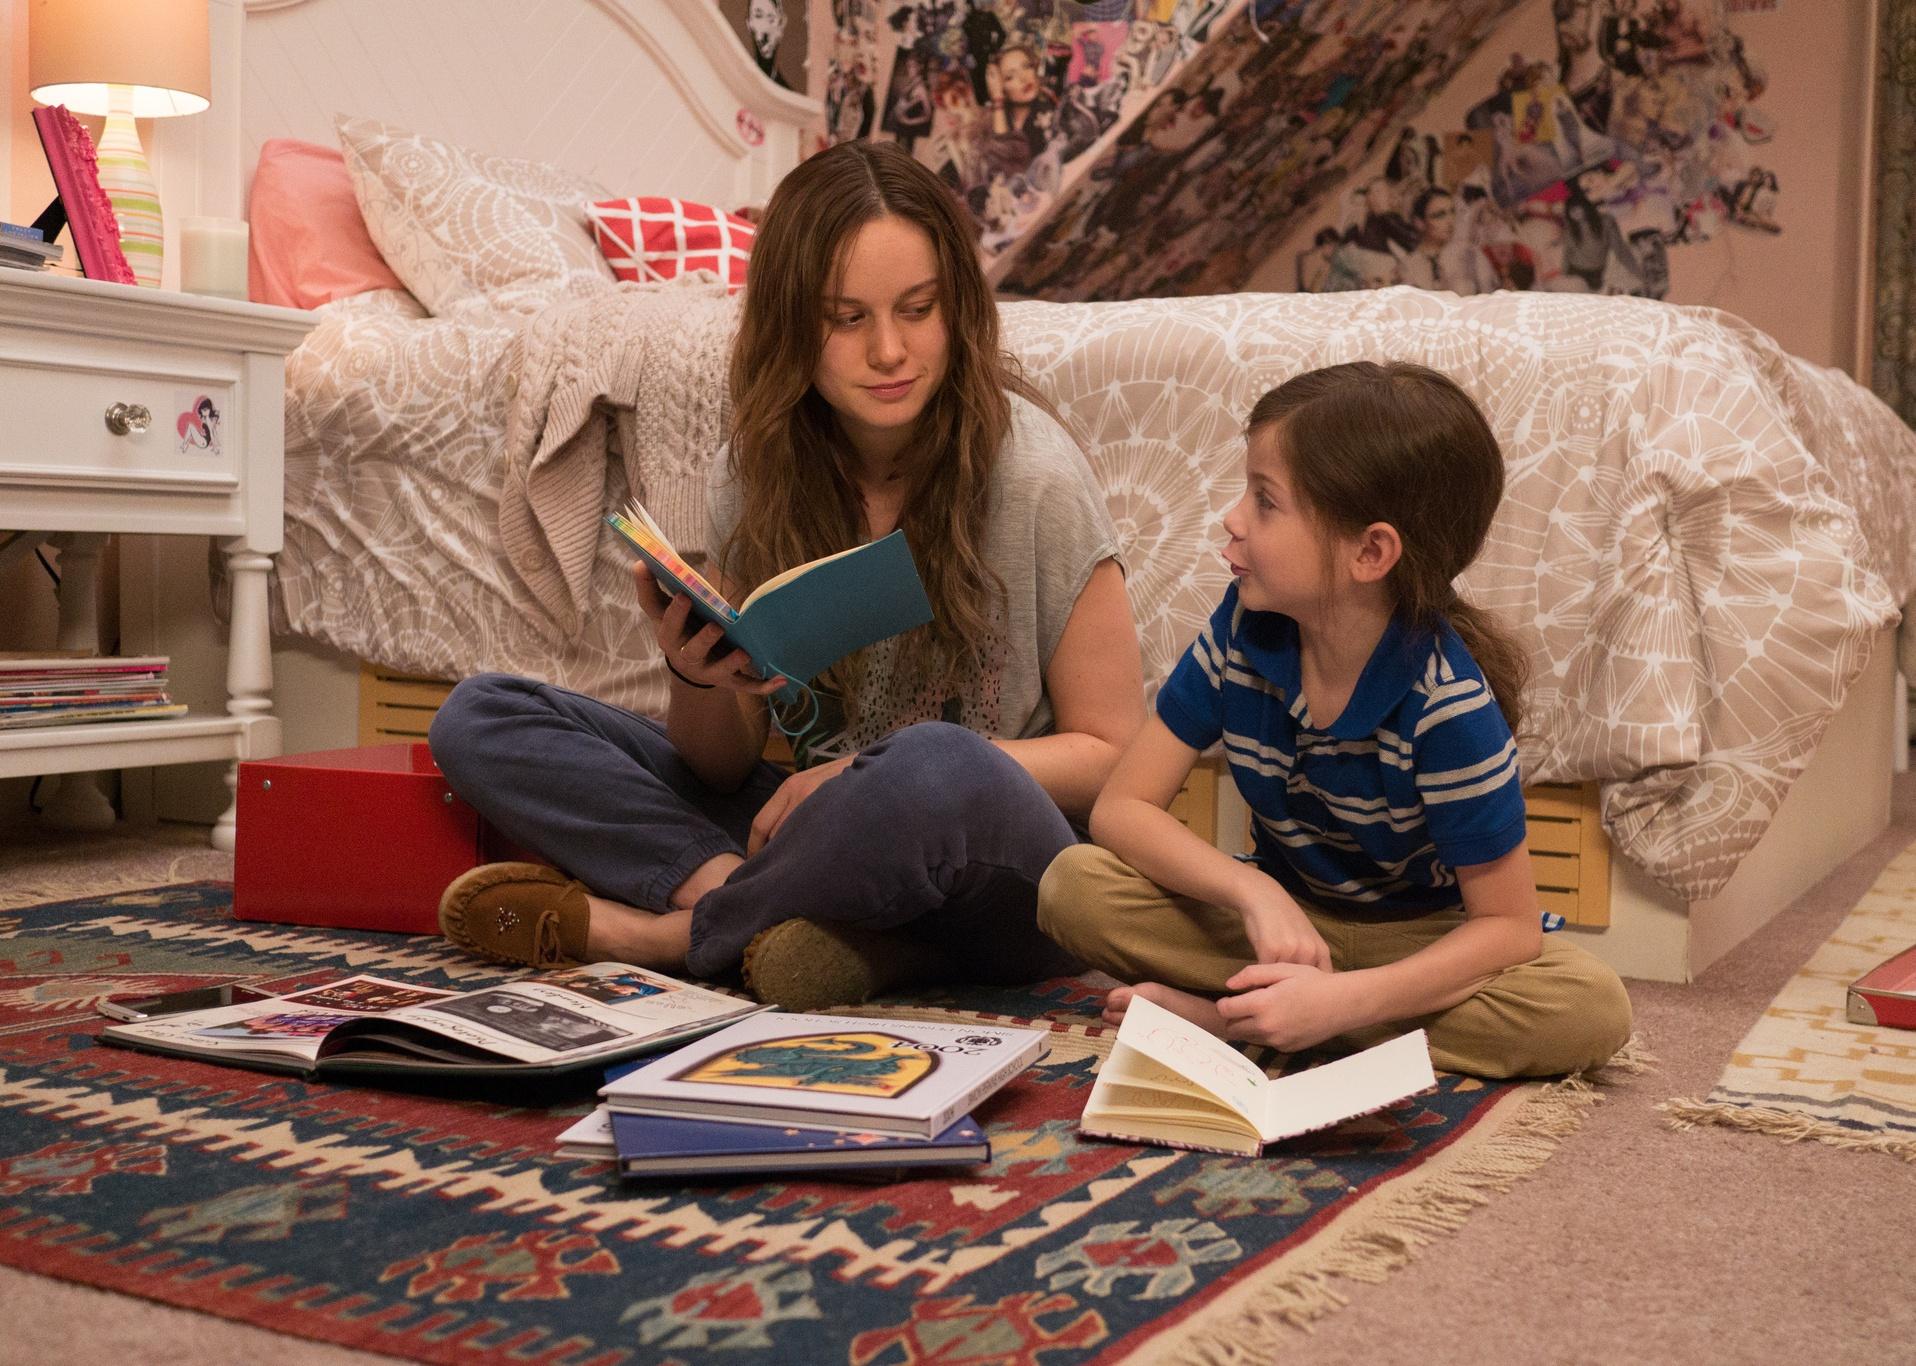 Brie Larson and a young boy sit on the floor reading together in a small bedroom.